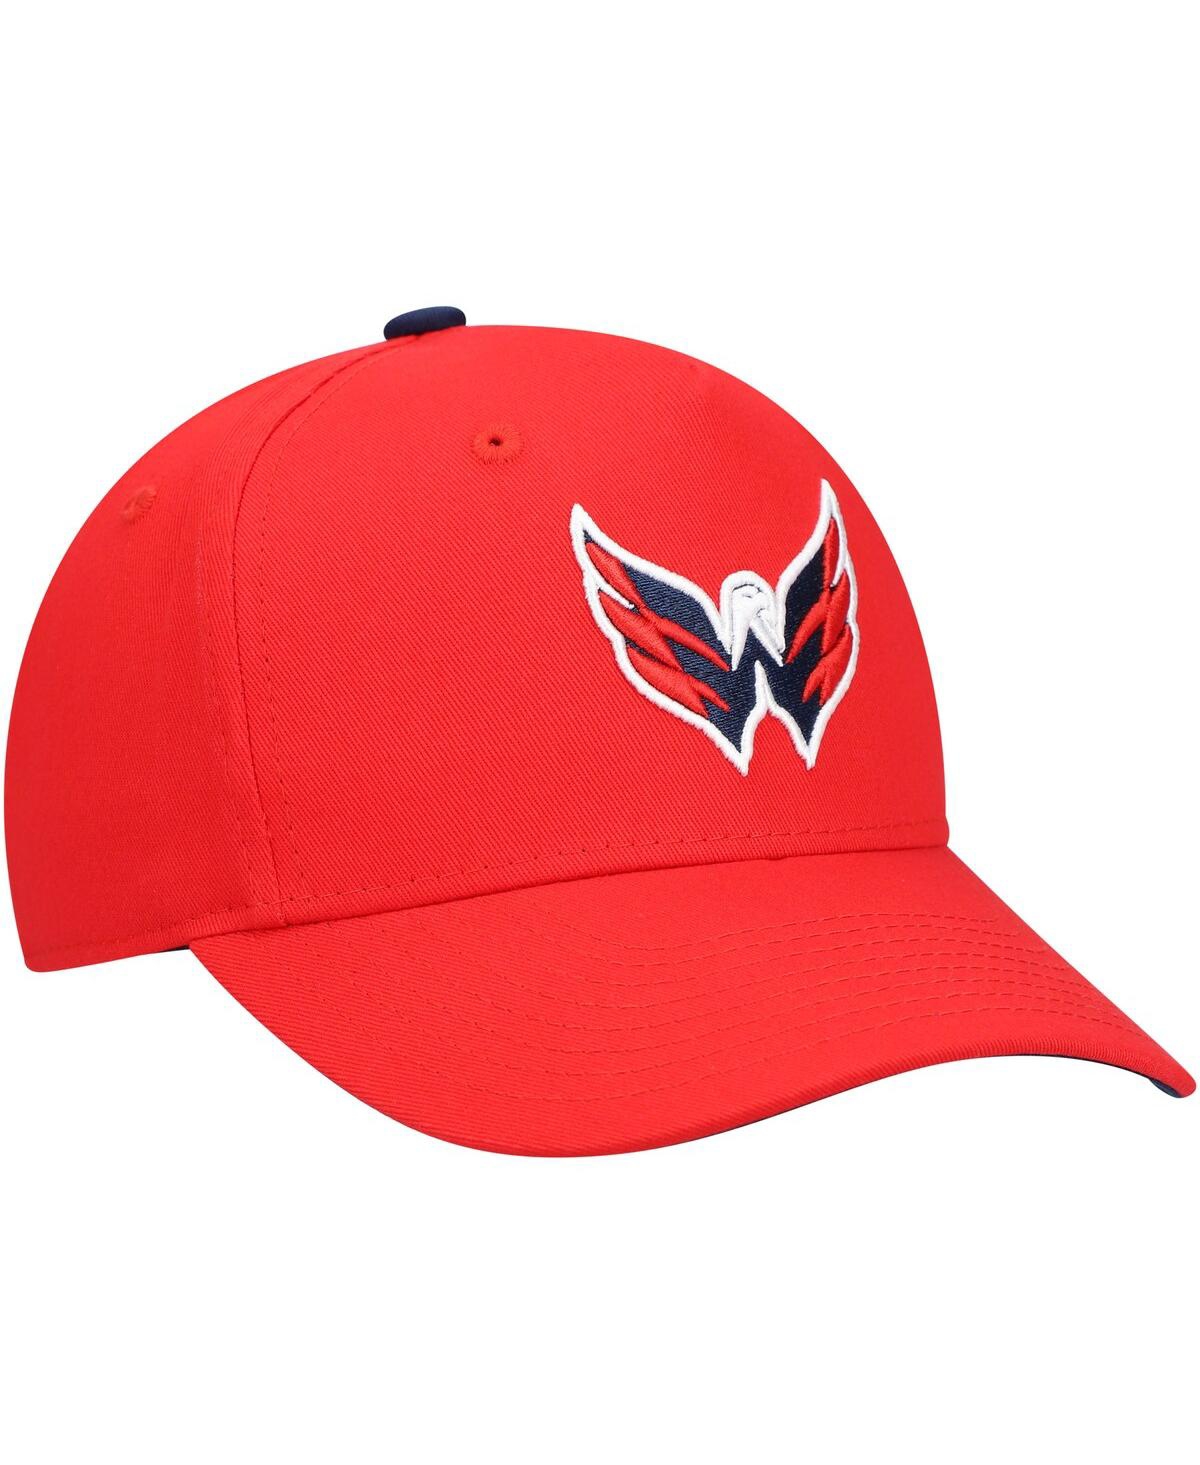 Shop Outerstuff Big Boys And Girls Red Washington Capitals Snapback Hat